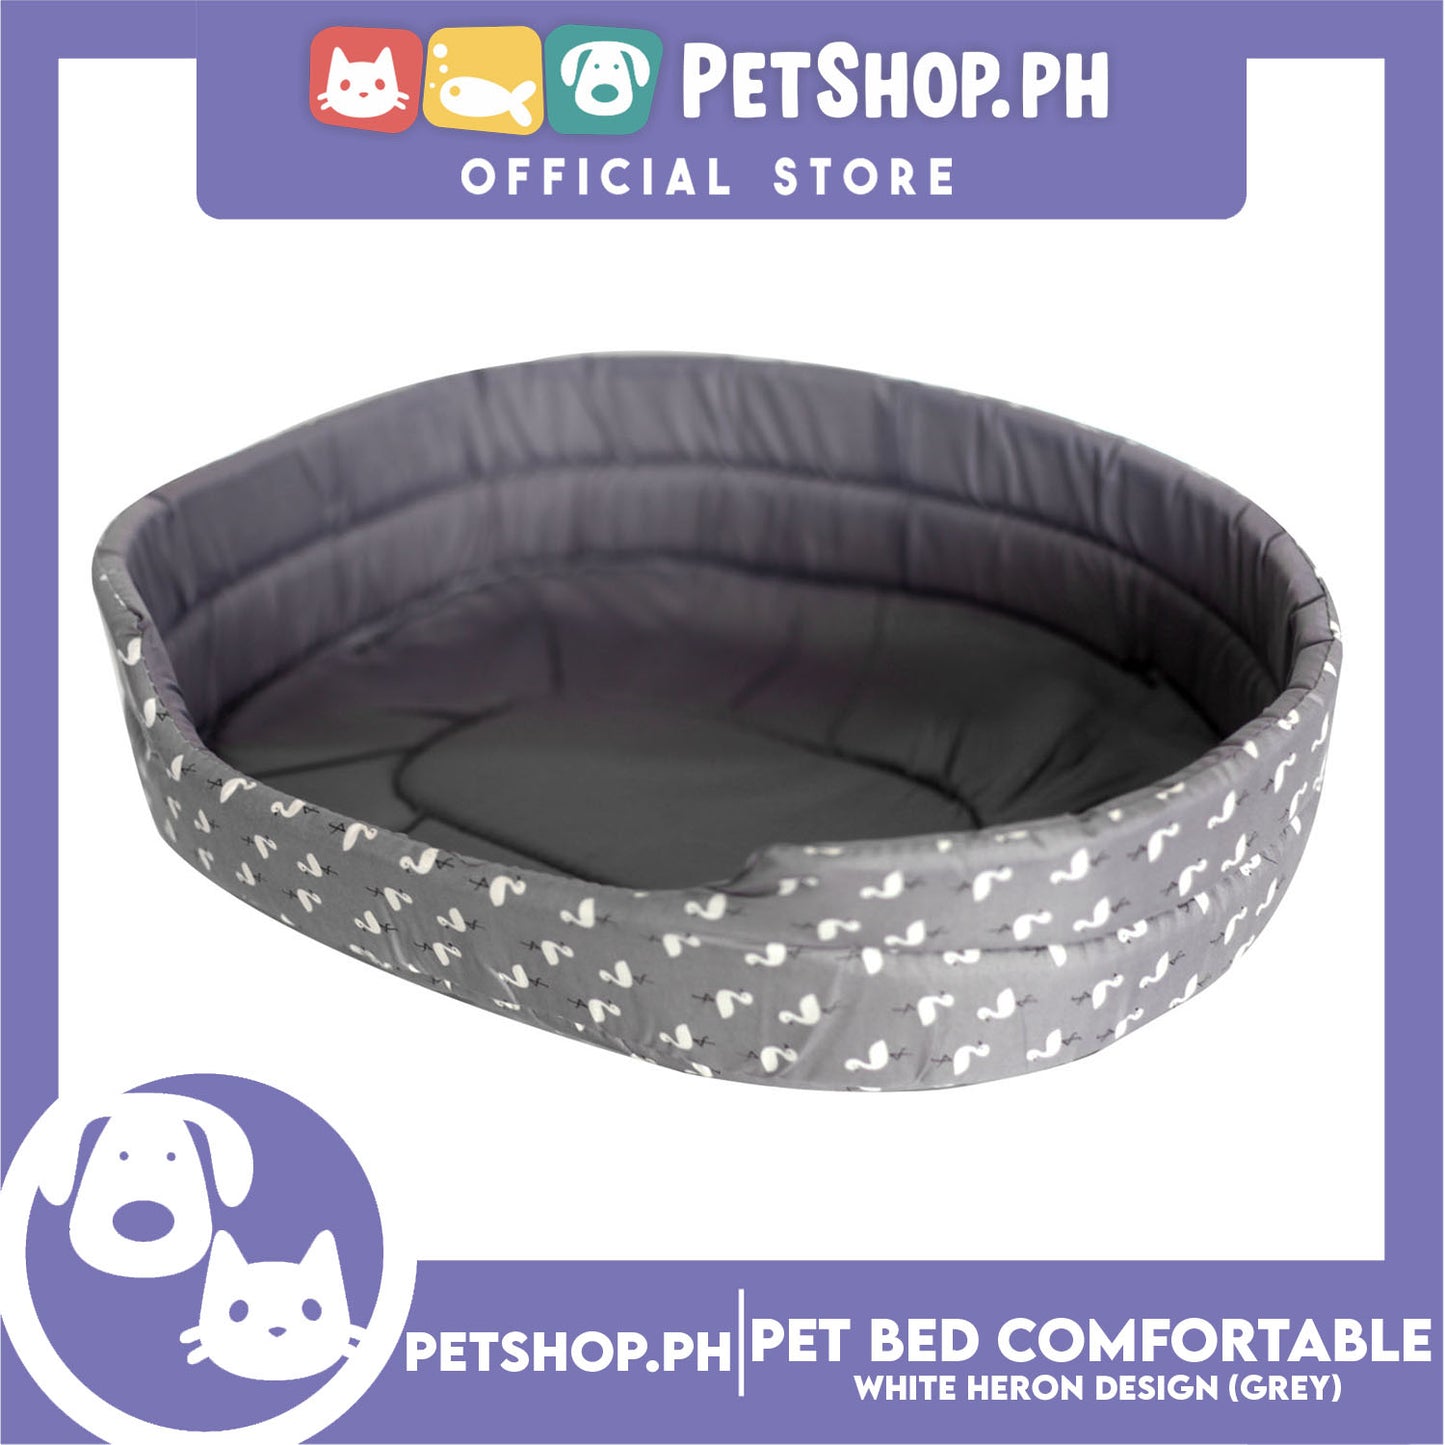 Pet Bed Comfortable Sleeping Bed with White Heron Design 43x30x10cm for Dogs & Cats Grey